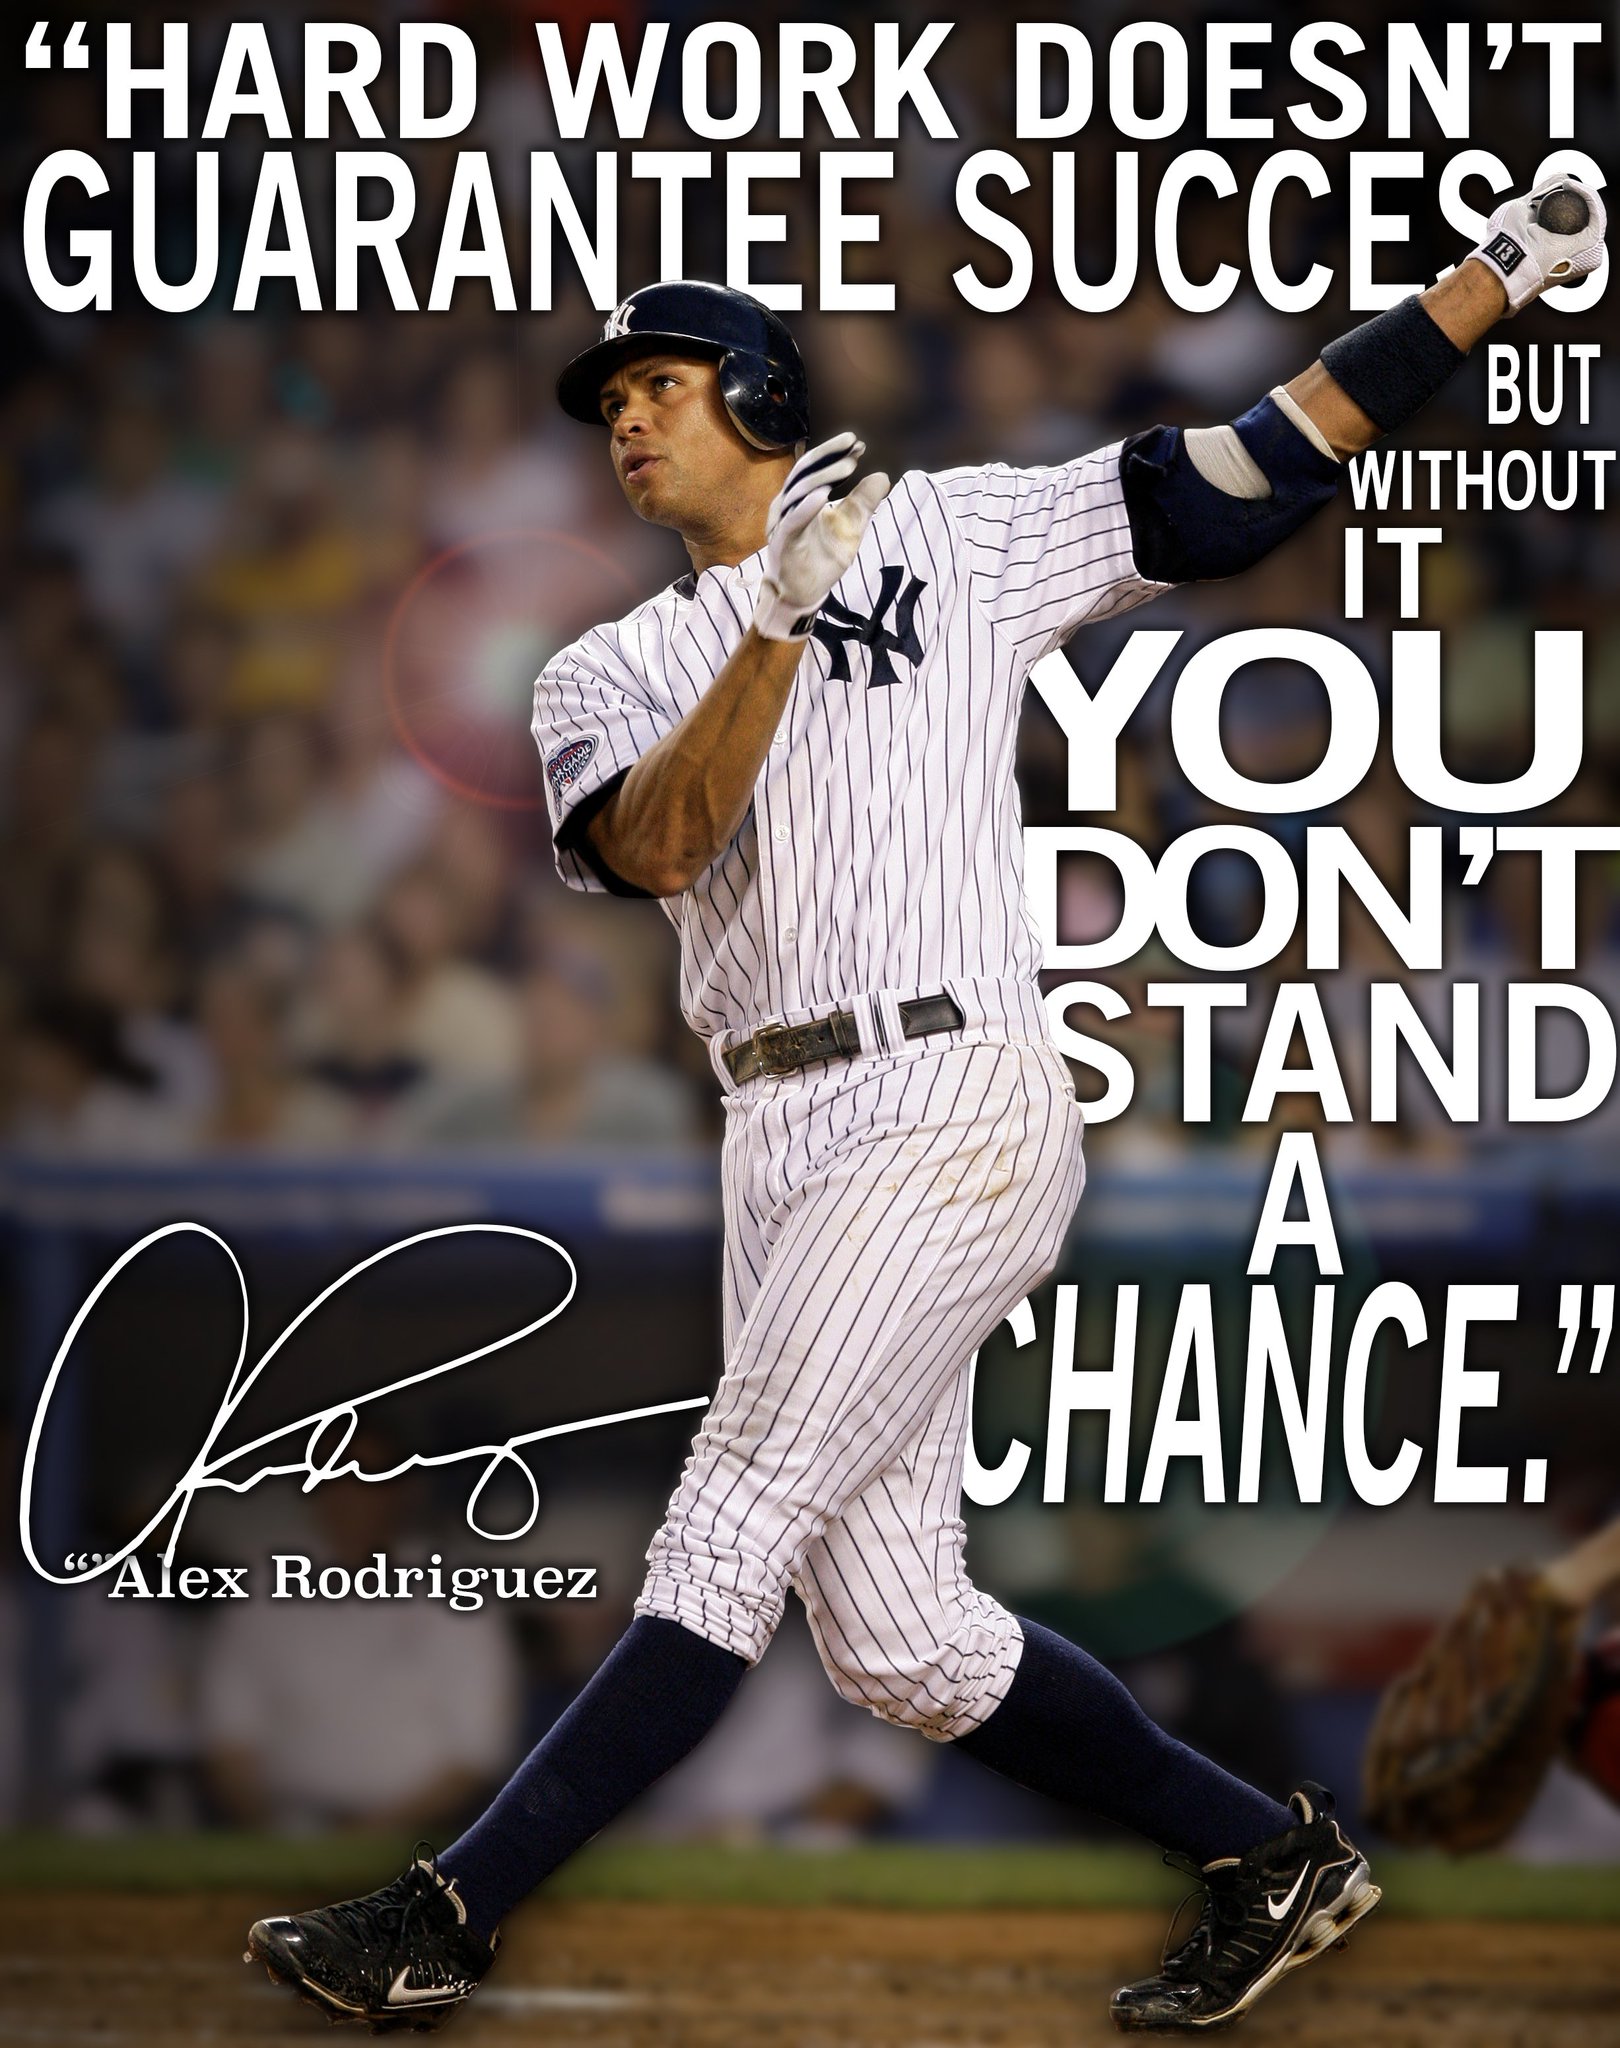 We wish Alex Rodriguez a very Happy 42nd Birthday. Thanks for all the memories,  